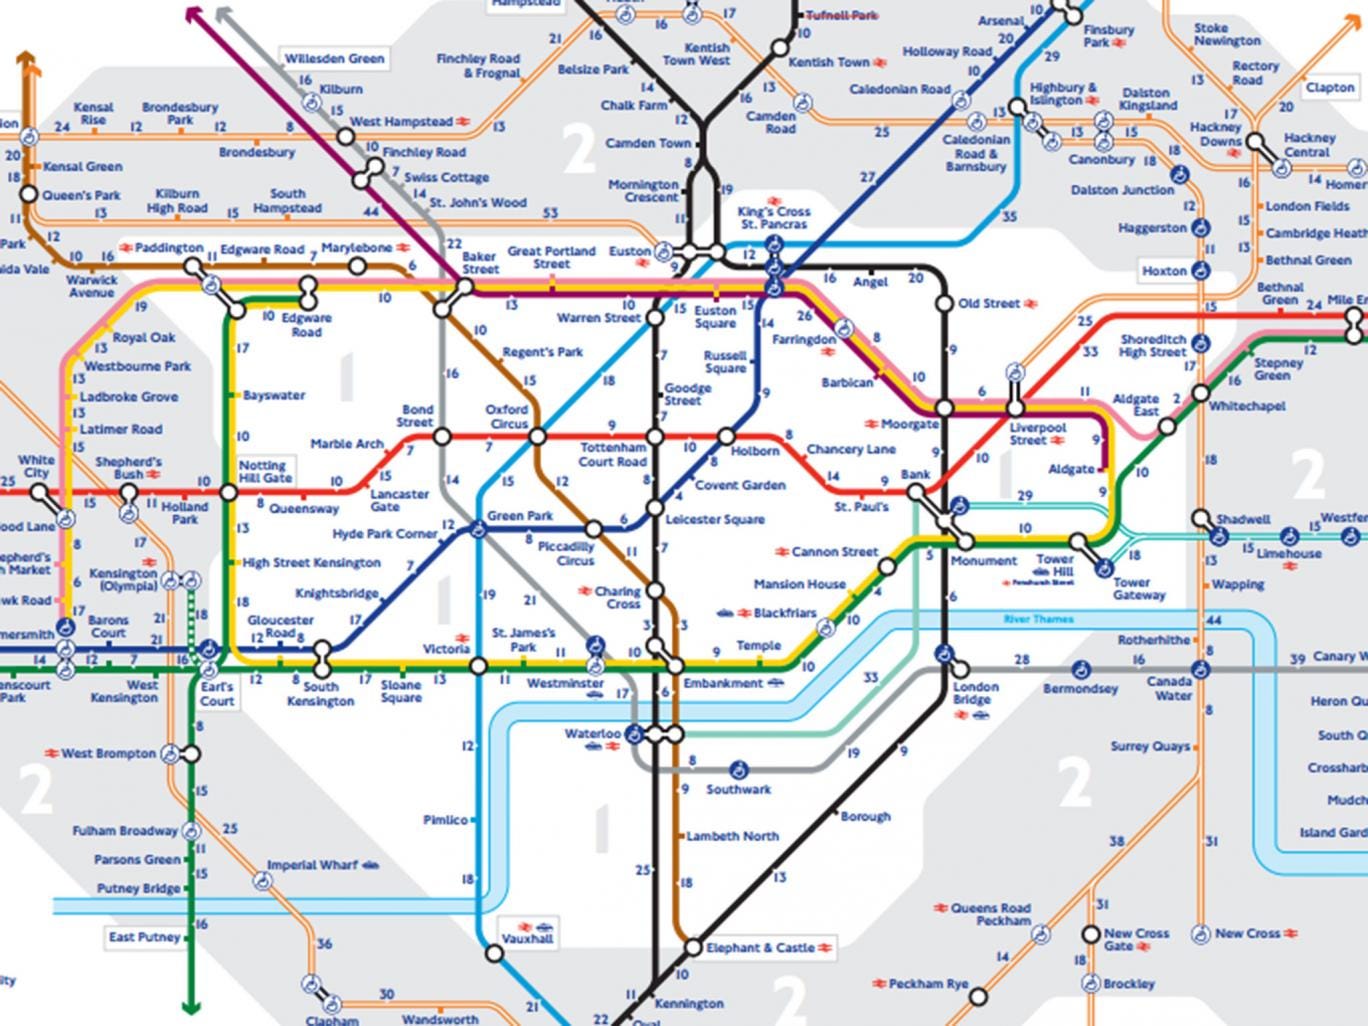 TfL releases first official 'walk the Tube' map for London | Home News ...